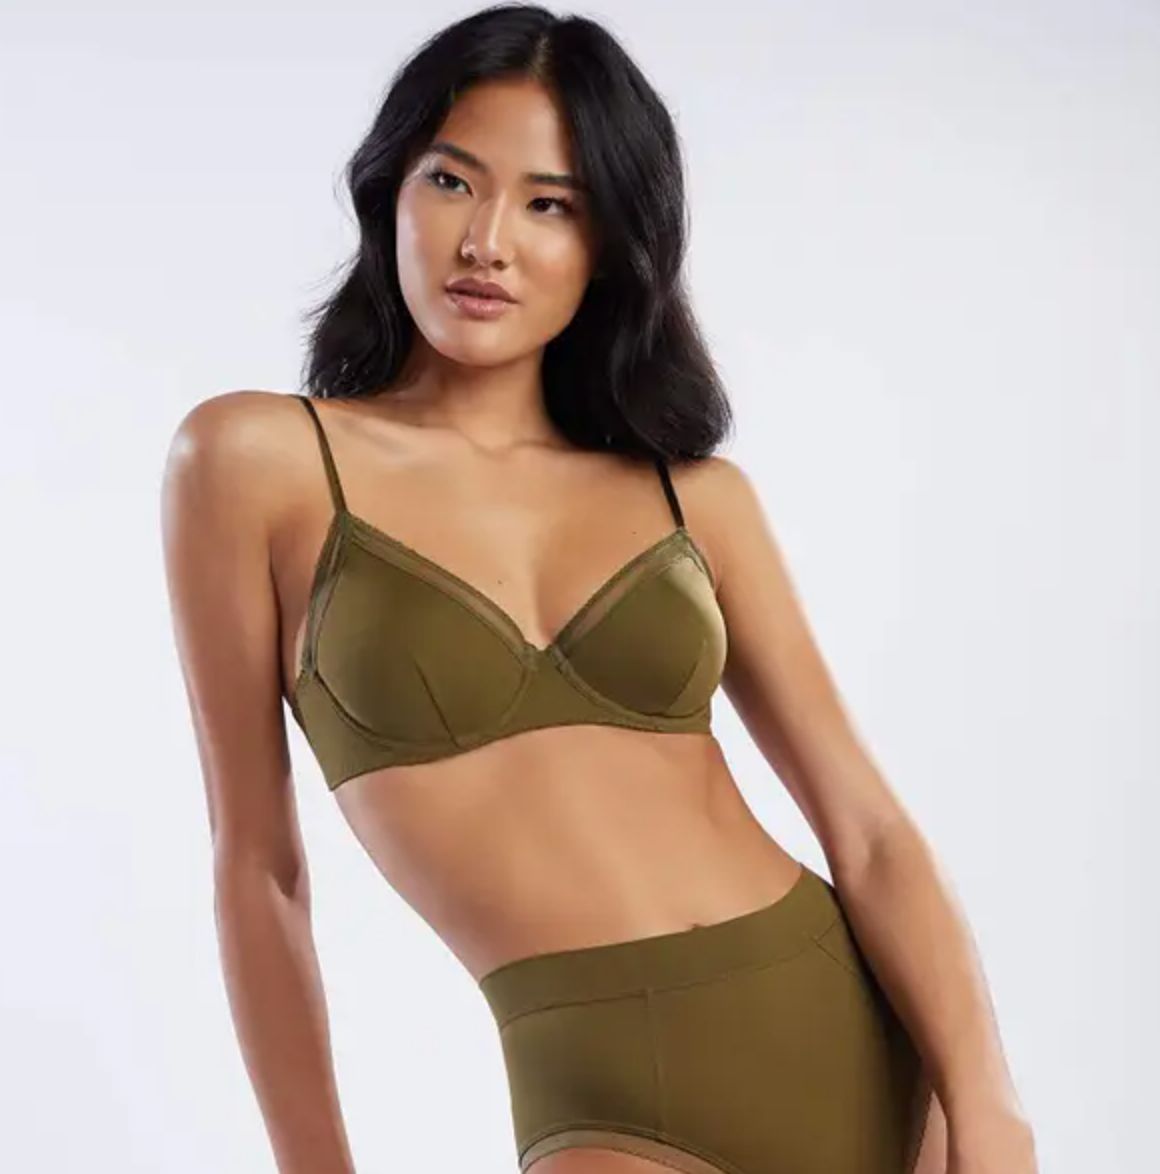 The Perspective of Lingerie as a Women's Undergarment